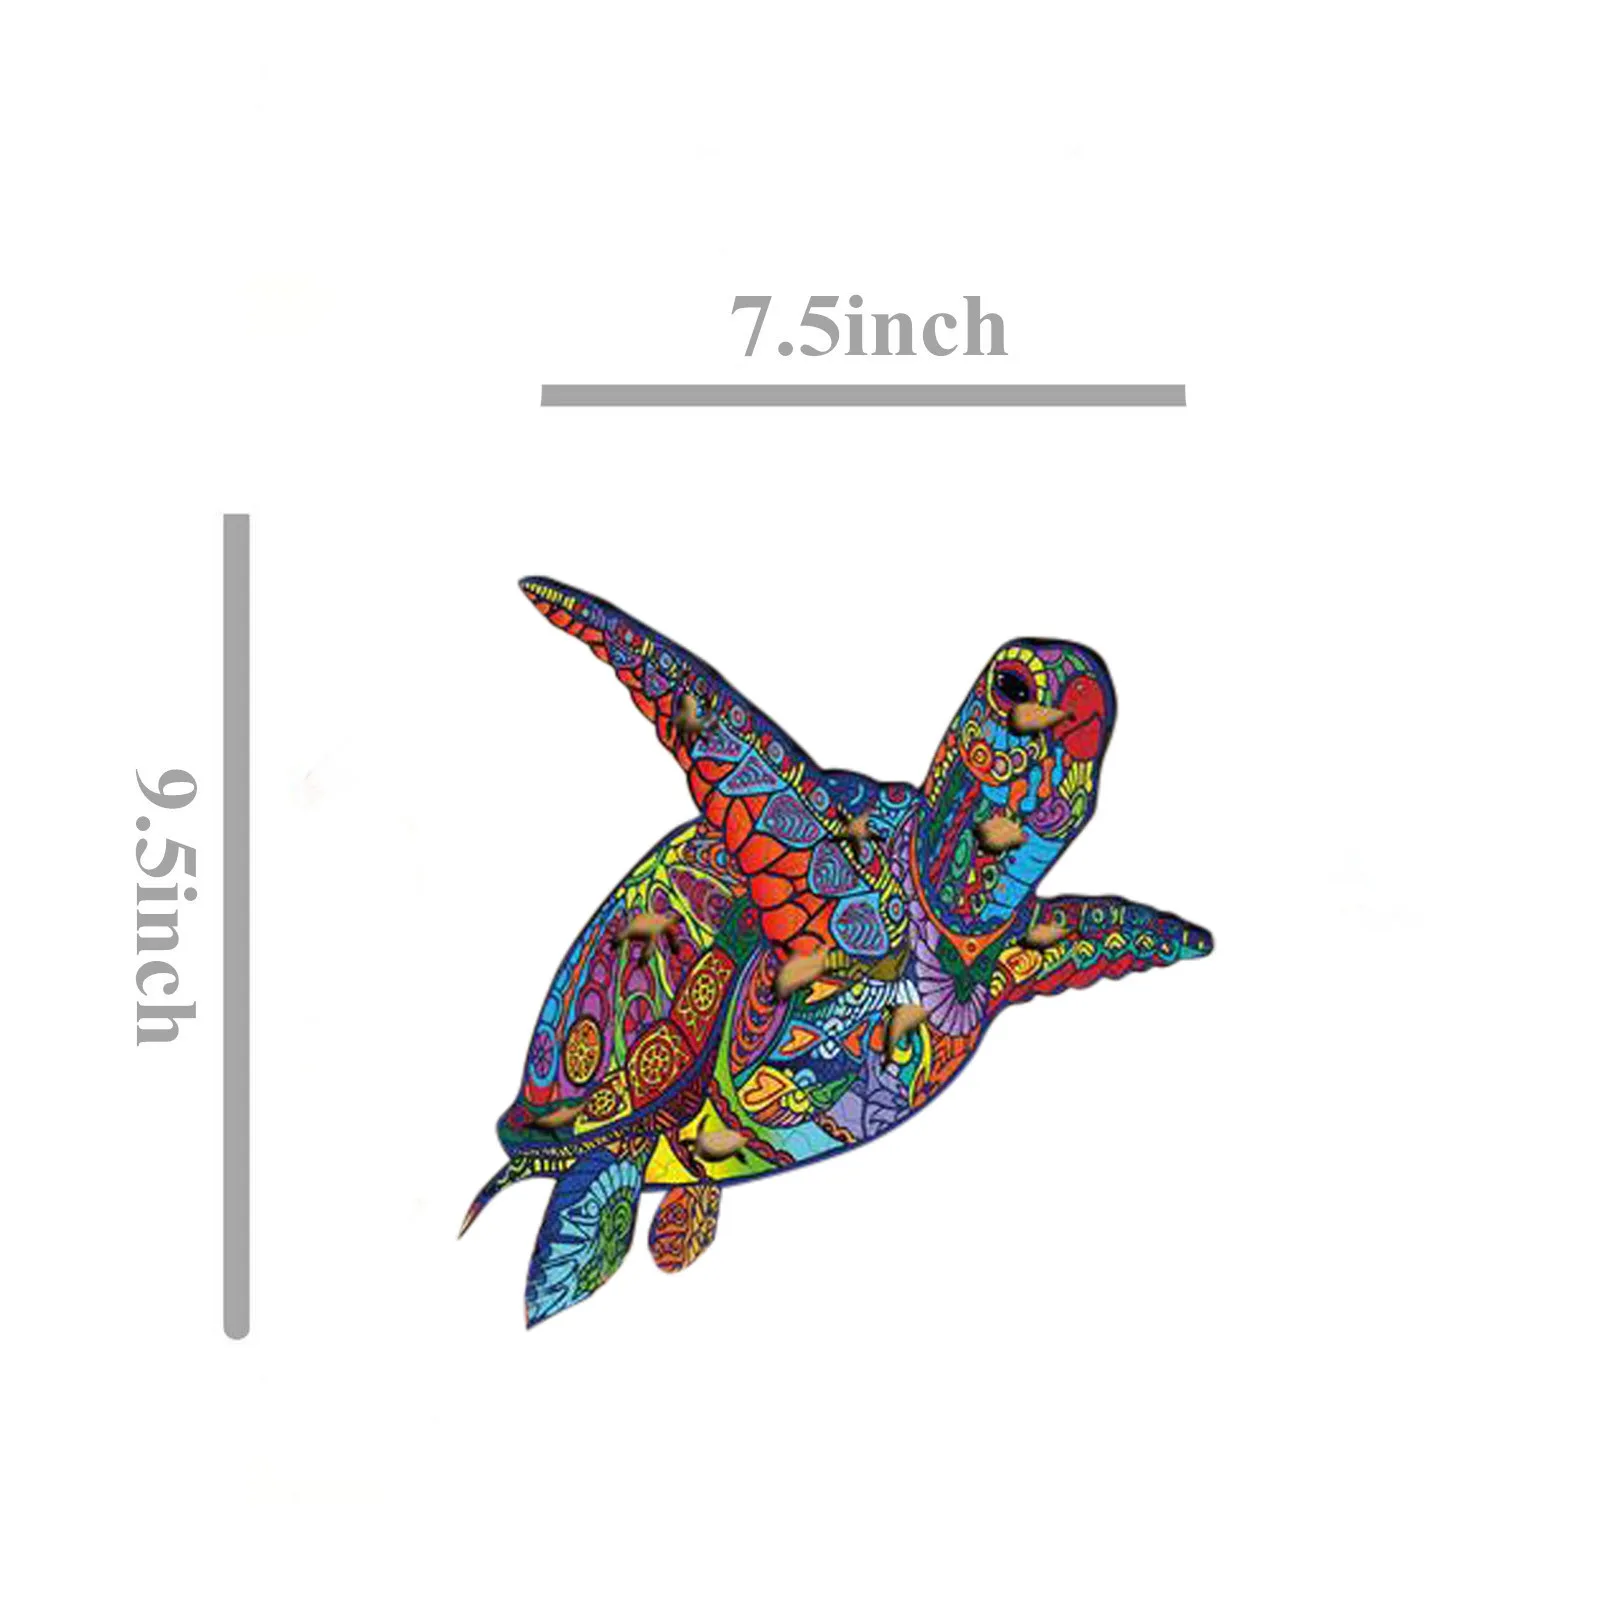 

Diy Wooden Puzzle Animals Sea Turtle Puzzle Toy Cartoon Animal Wooden Jigsaw Puzzles For Adults Kids Toys Juguetes Para Nios